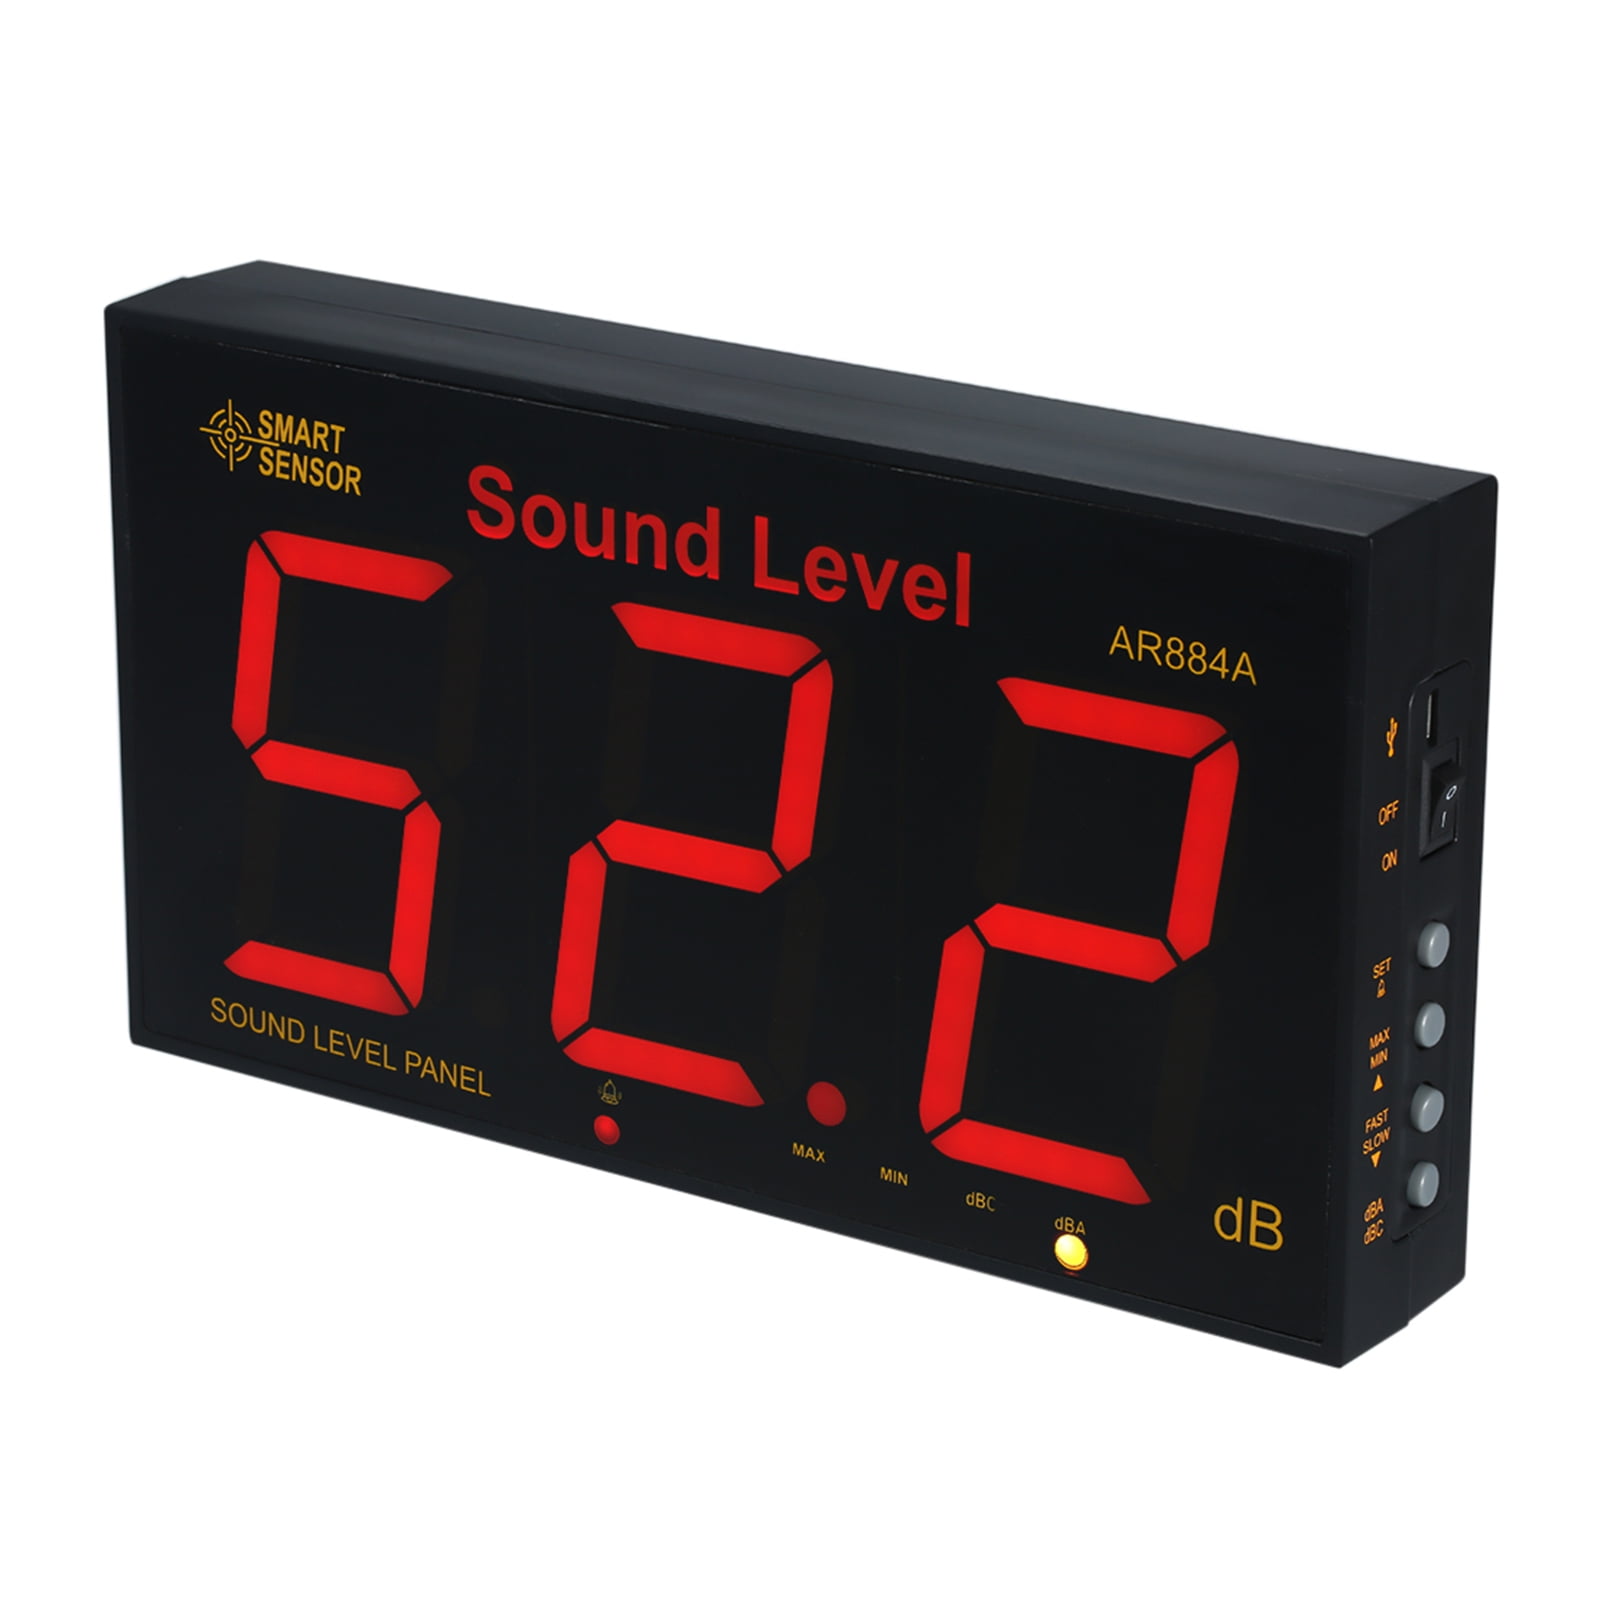 Yunnyp AS804 Noise Meter Ships Without Battery,SMART SENSOR AS804 Digital Sound Level Meter Testing Monitor 30-130dBA